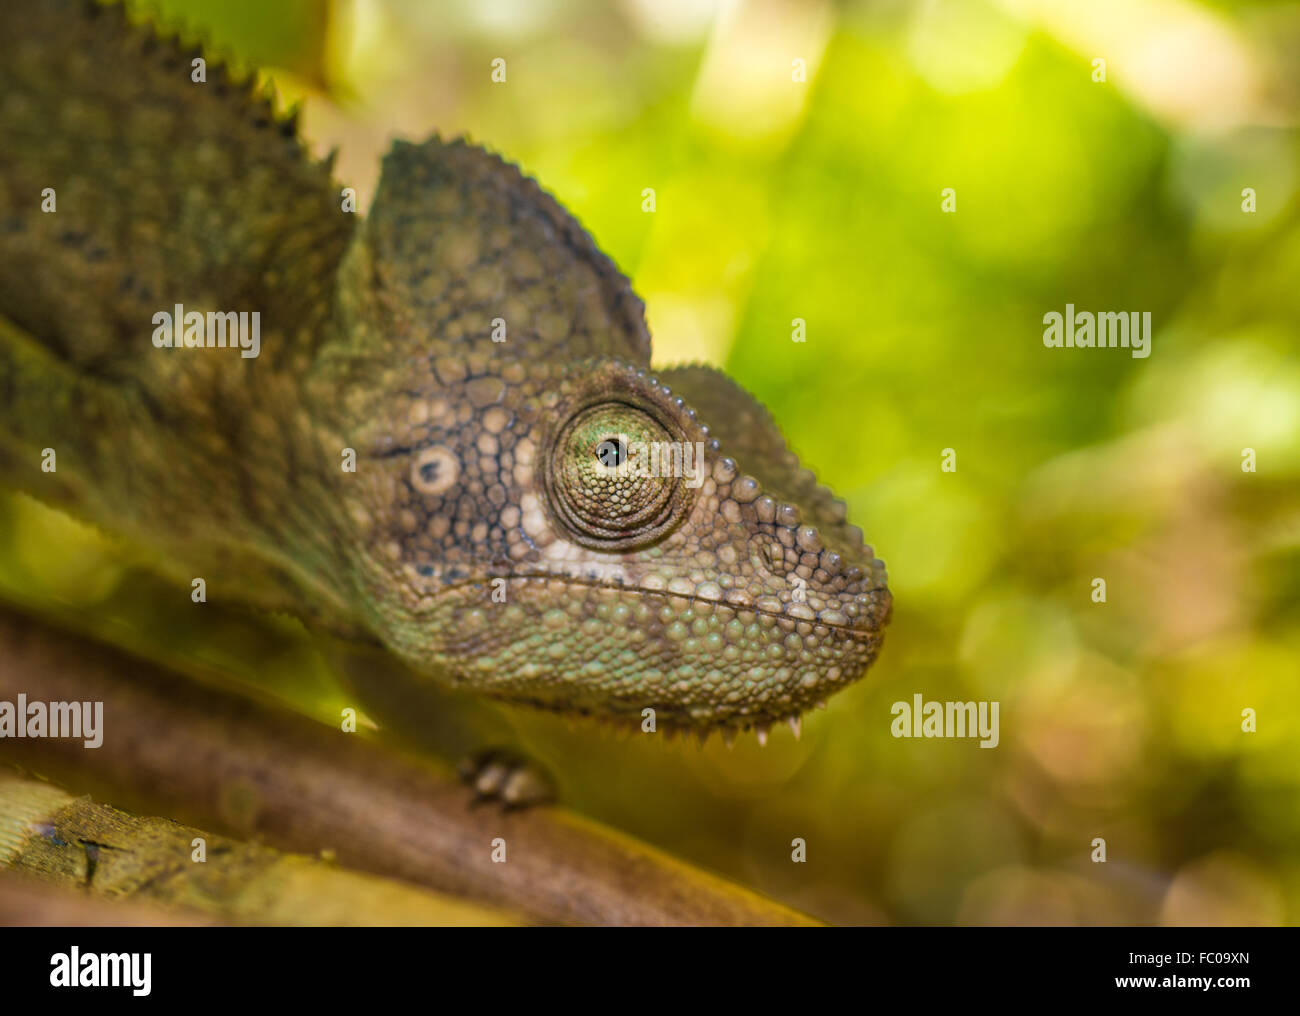 Colorful chameleon of Madagascar, very shallow focus Stock Photo